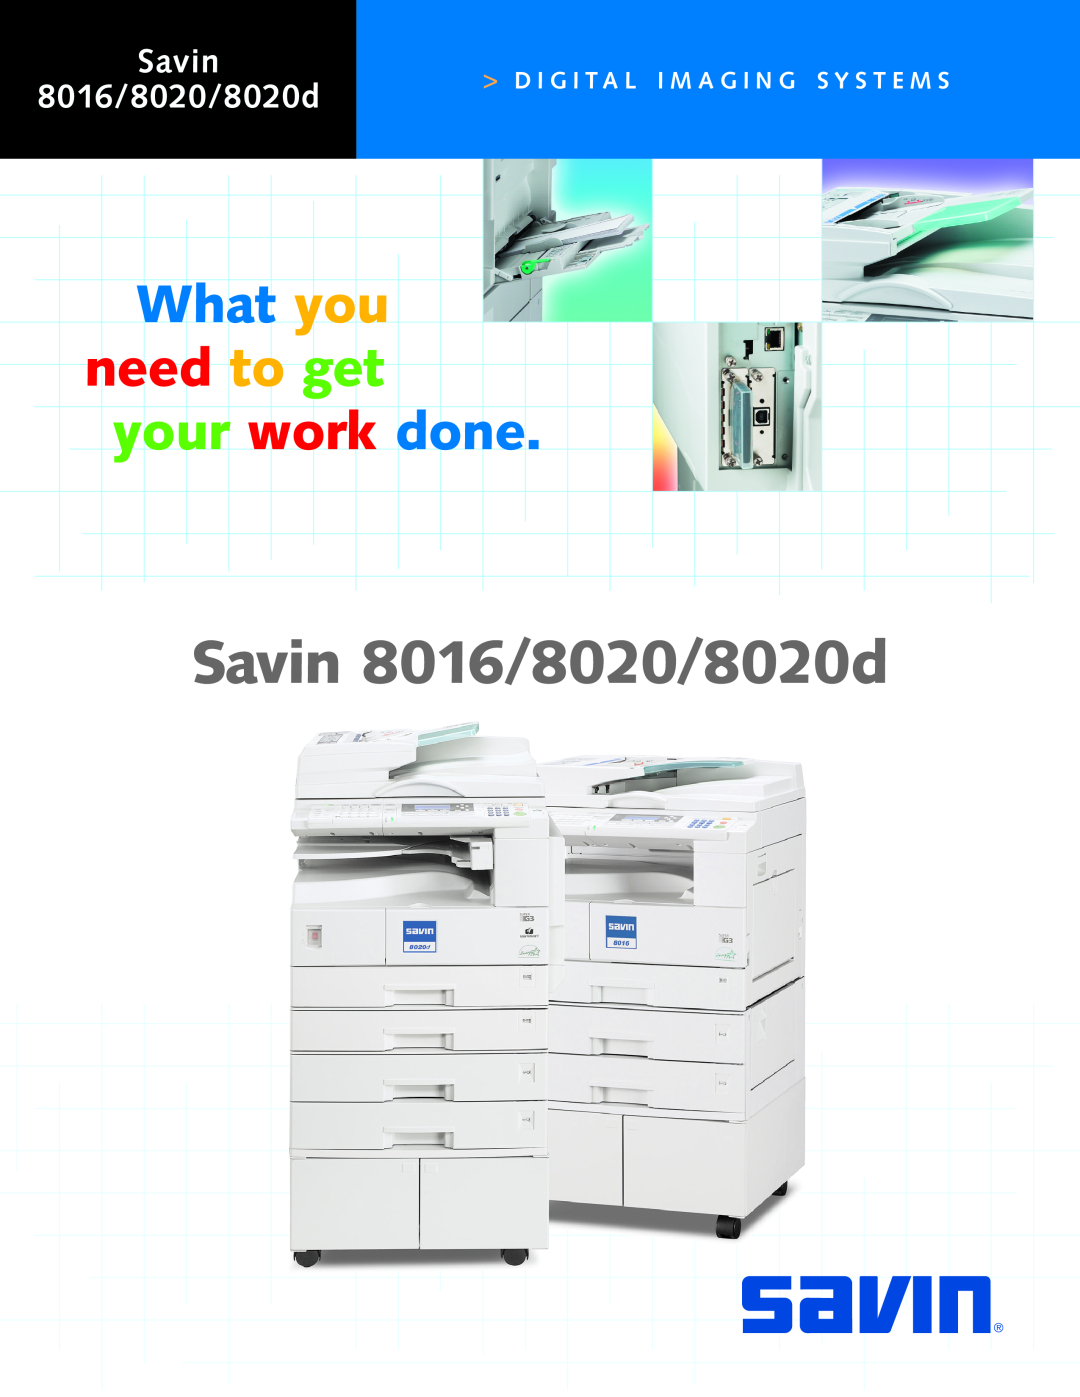 Savin manual Savin 8016/8020/8020d, What you, need to get, your work done, D I G I T A L I M A G I N G S Y S T E M S 